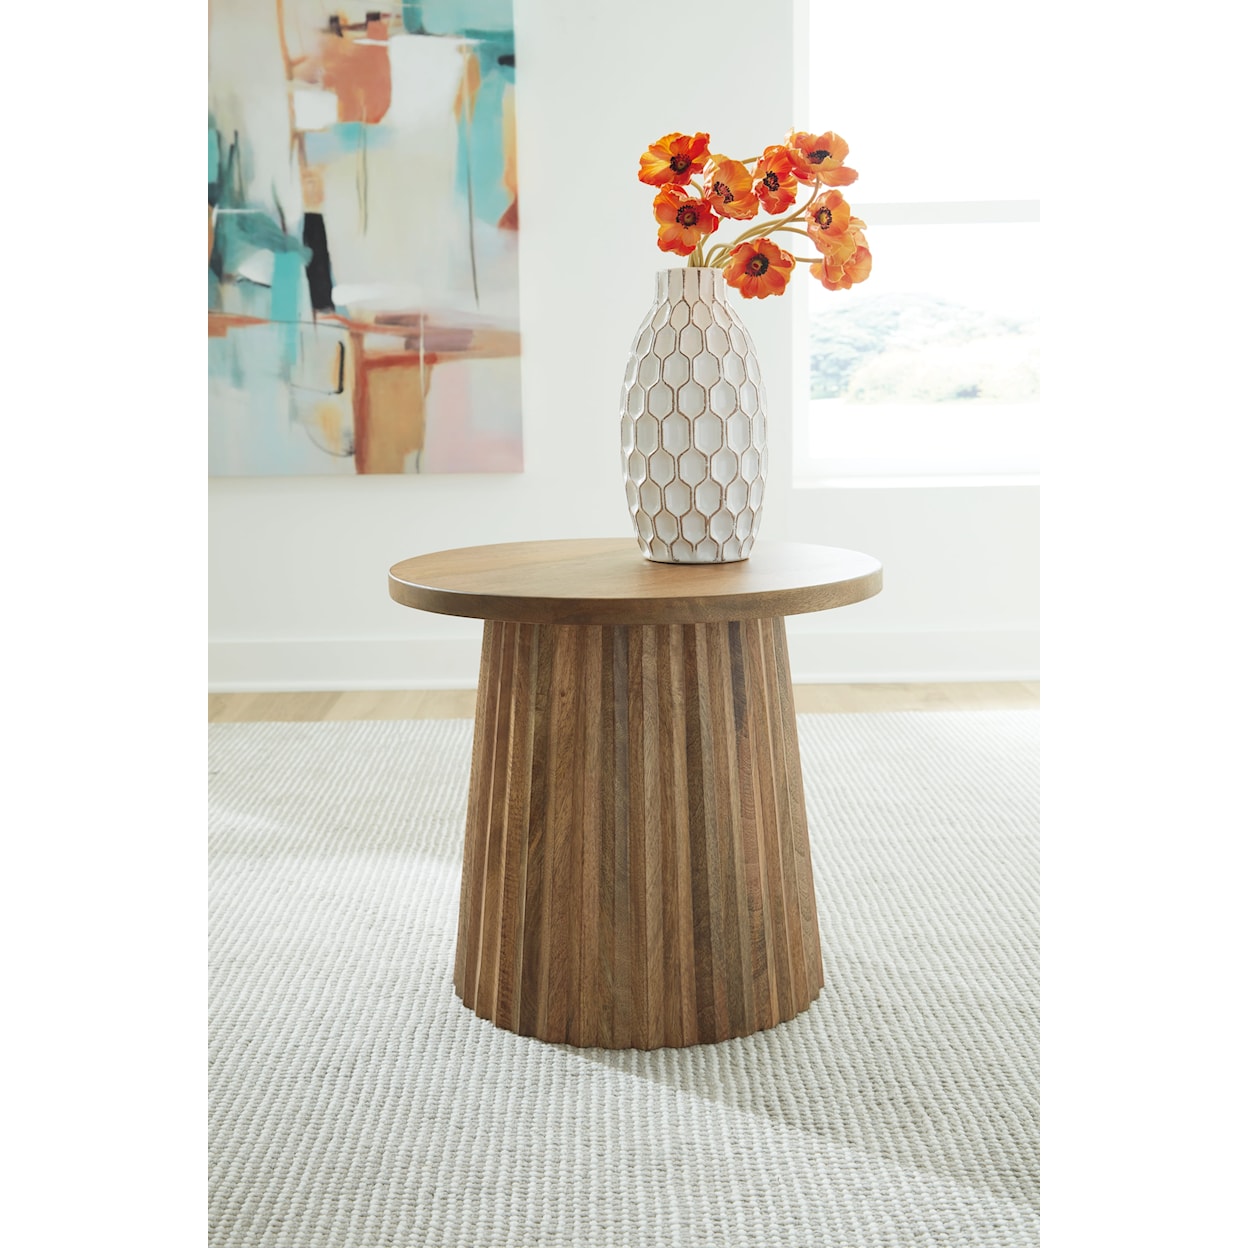 Benchcraft Ceilby Accent Table